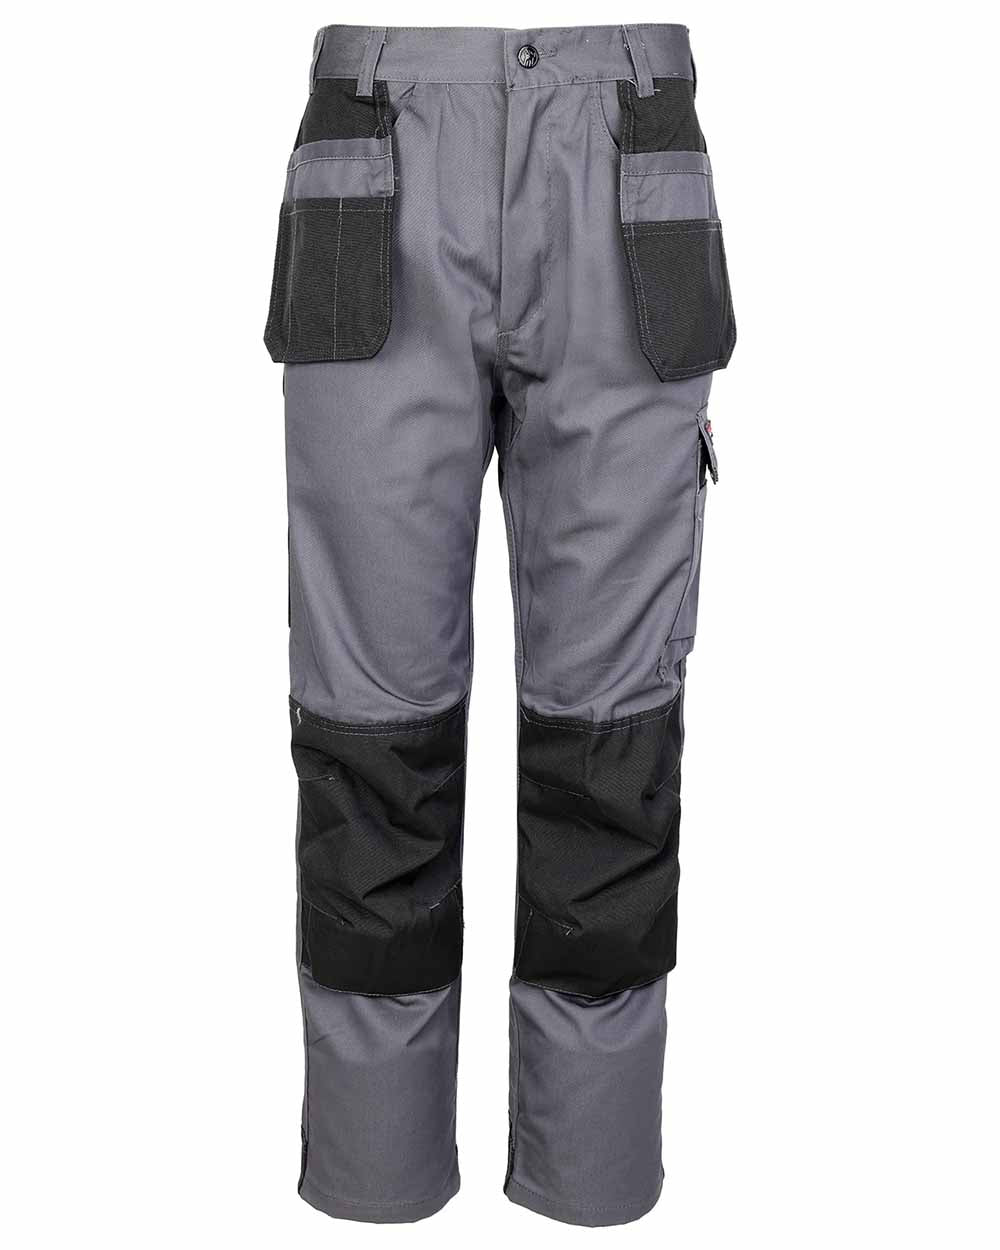 TuffStuff Excel Work Trousers